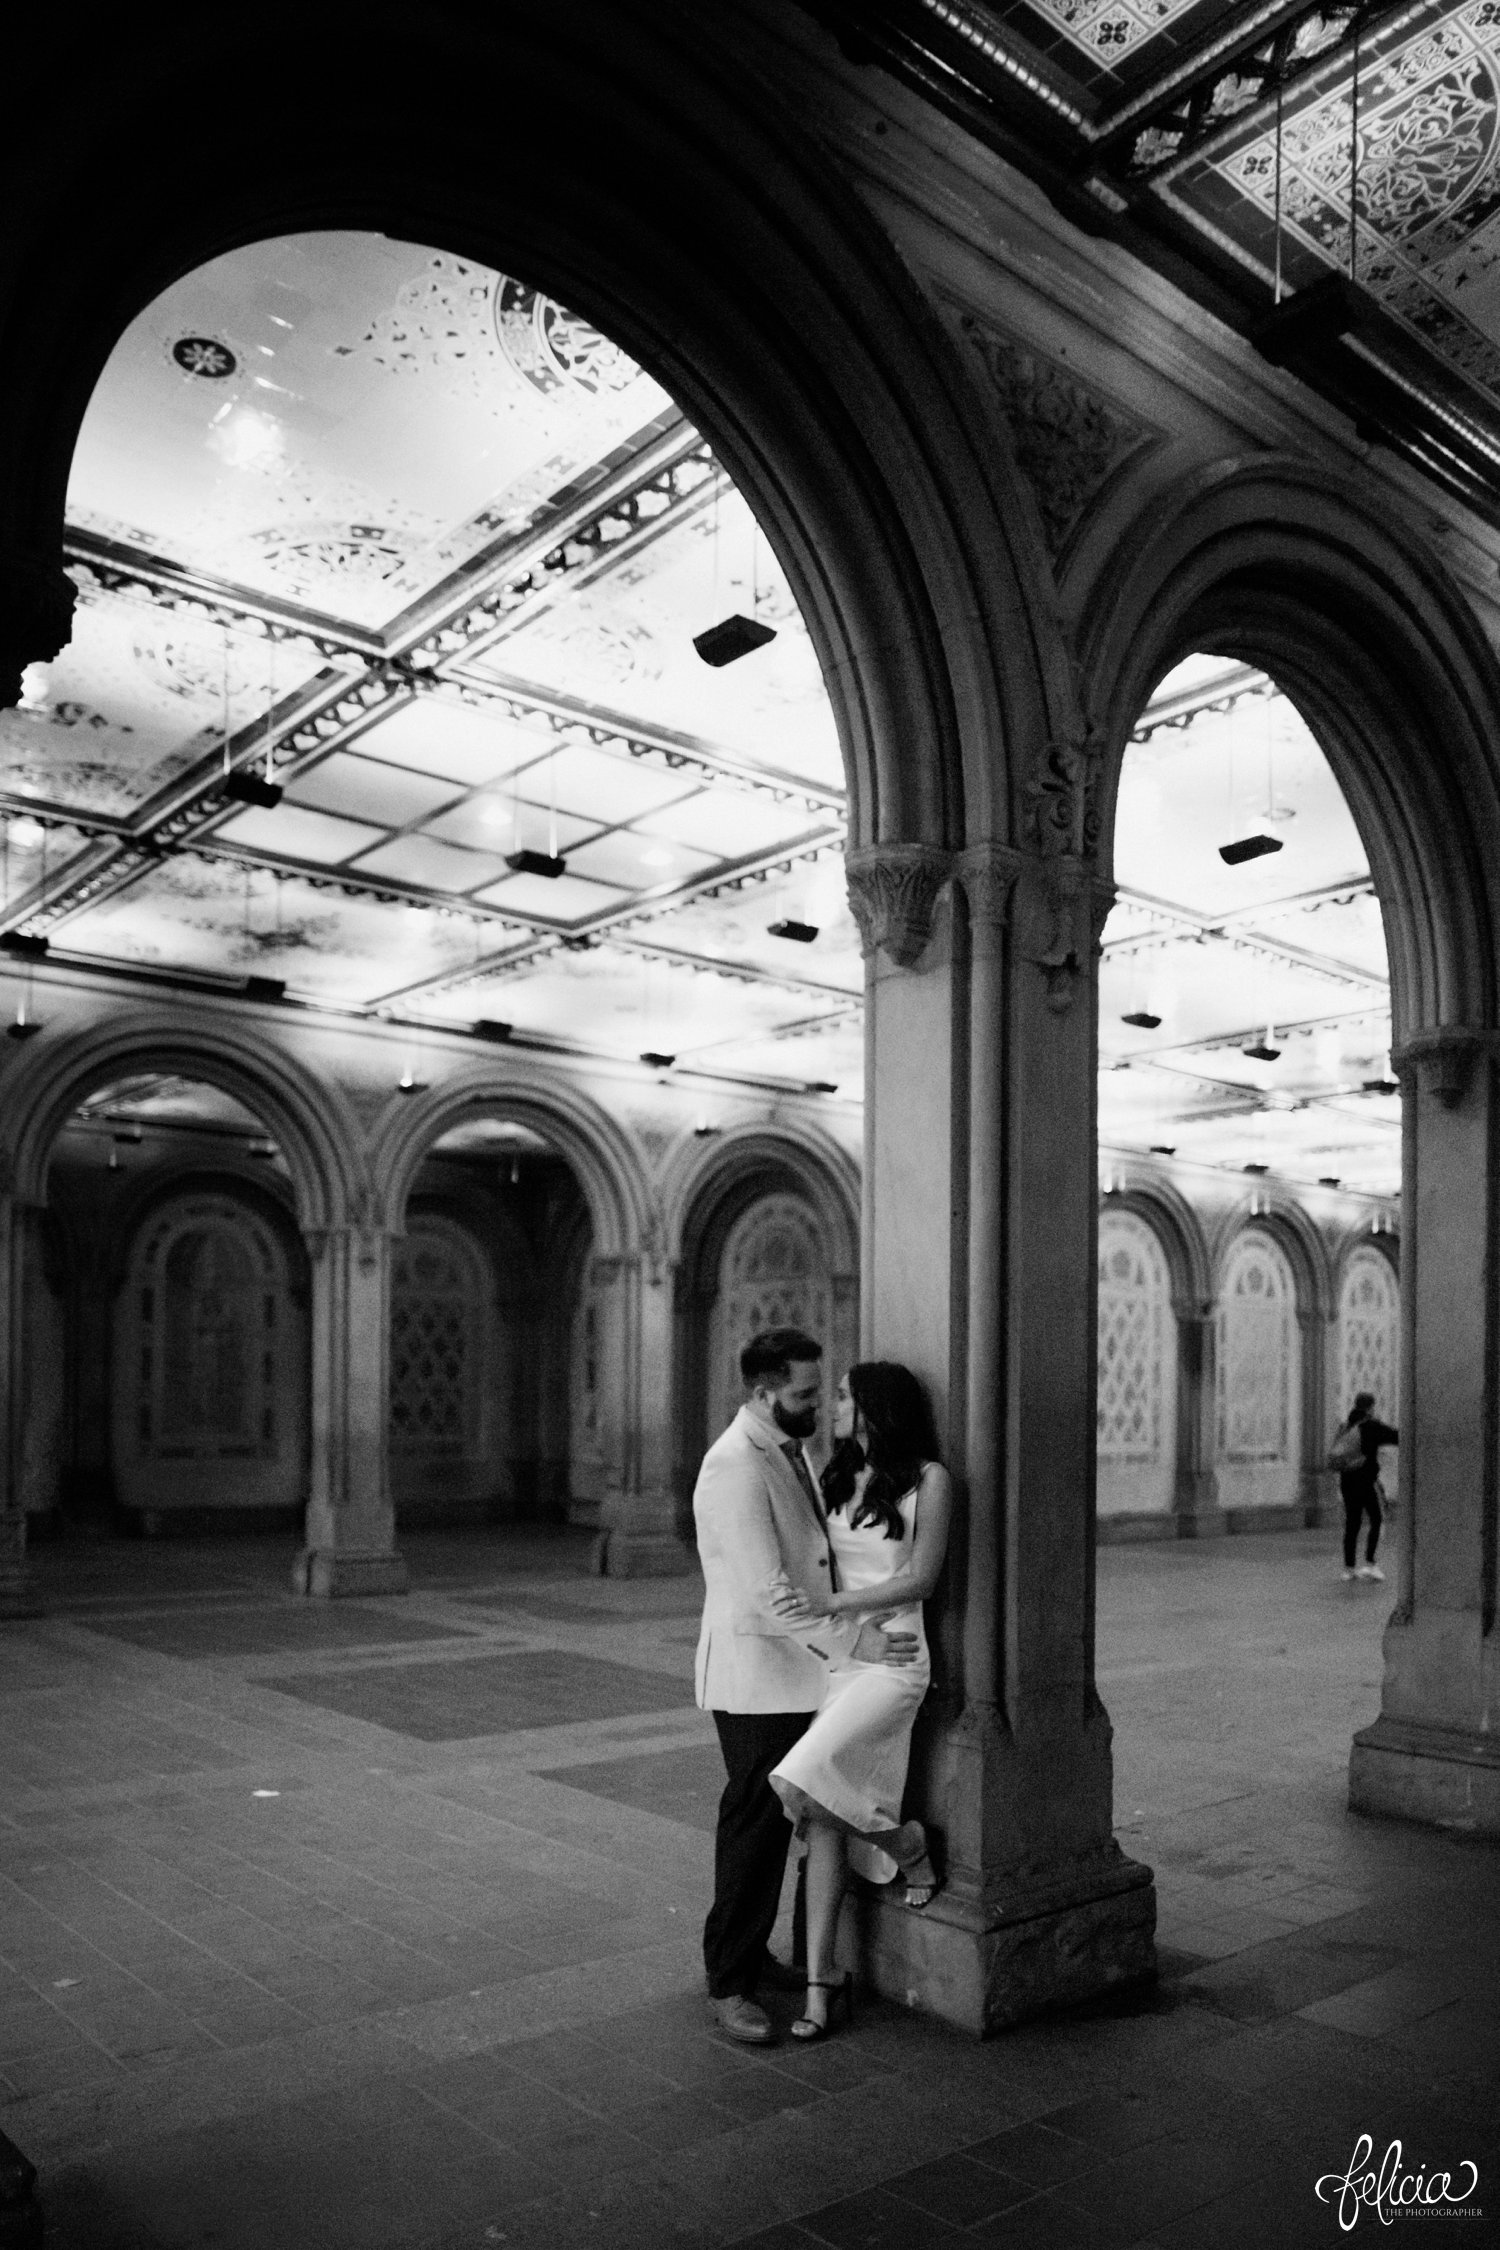 images by feliciathephotographer.com | destination wedding photographer | elopement | new york city | second look | bethesda | central park | detailed ceiling | architecture | romantic | classic | cowl neck dress | black and white | 